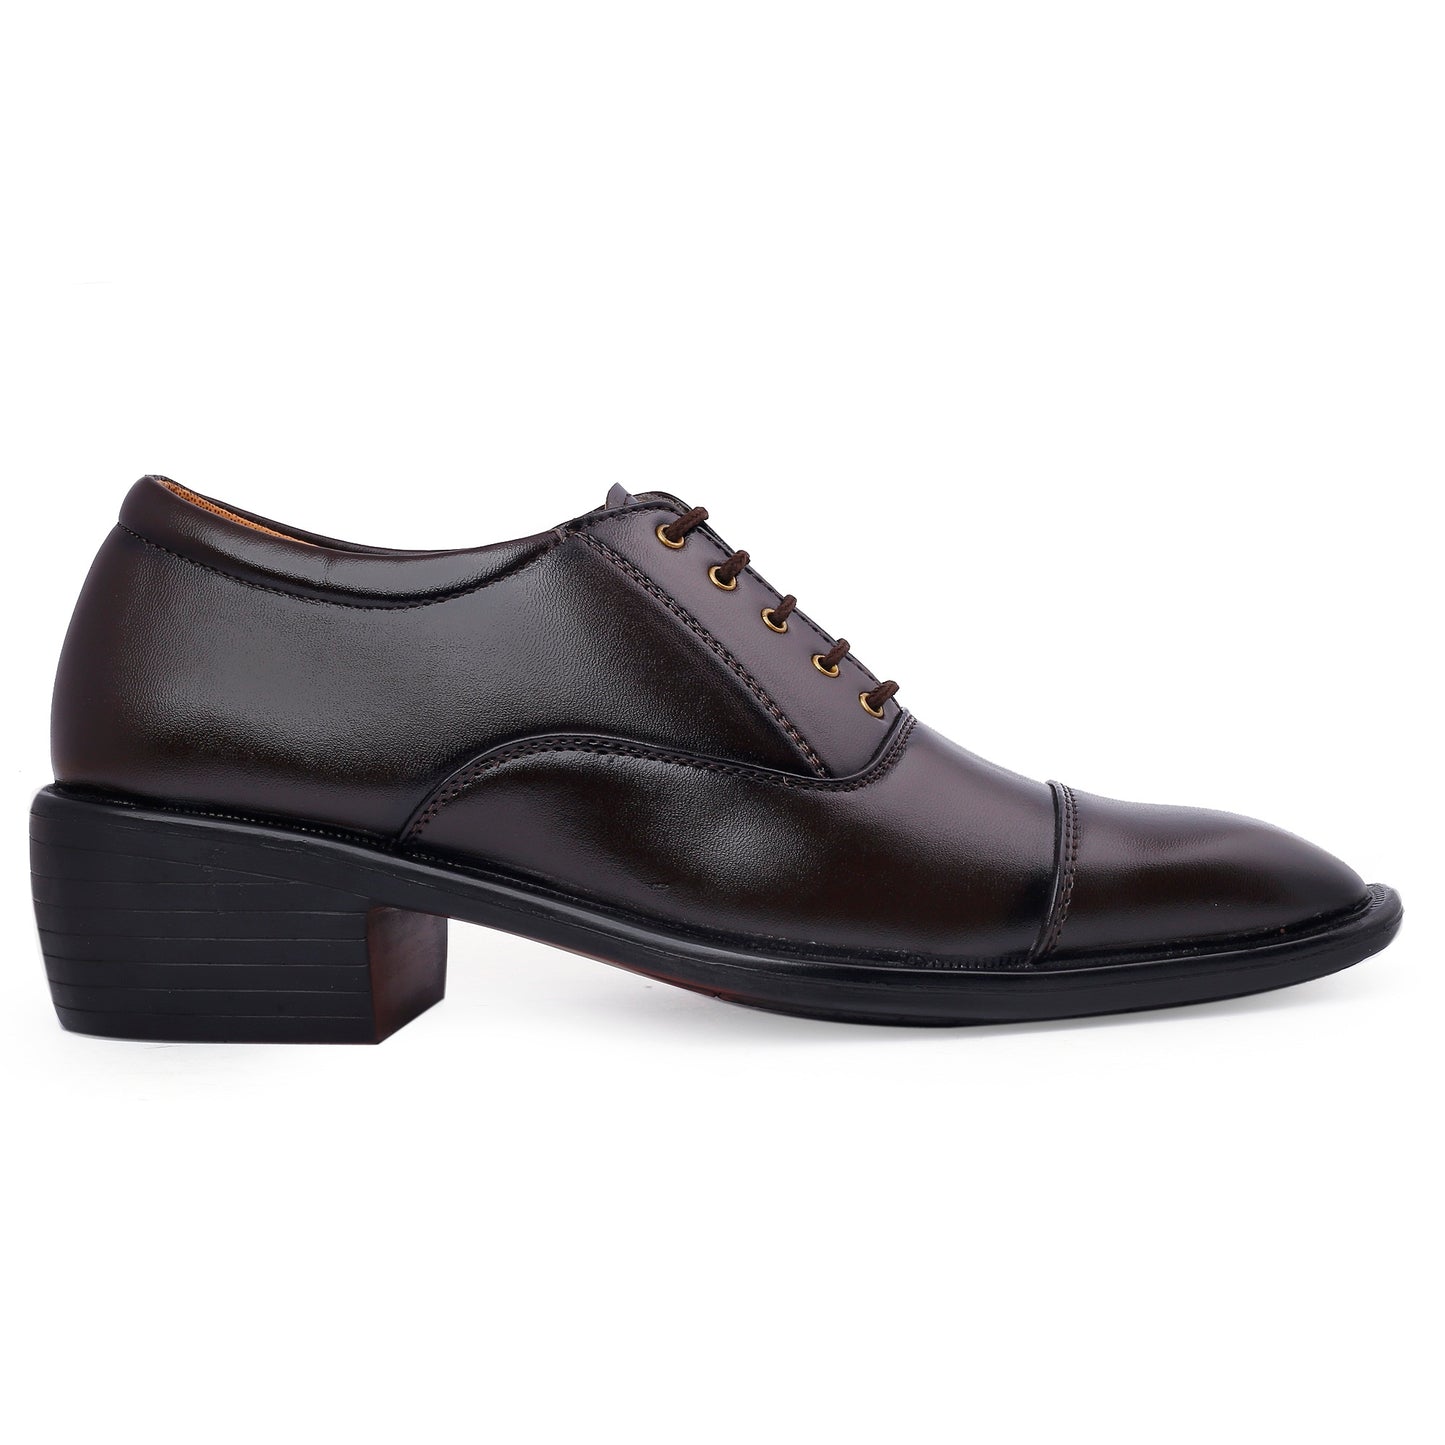 BXXY Men's Height Increasing Stylish Casual and Formal Wear Lace-Up Shoe